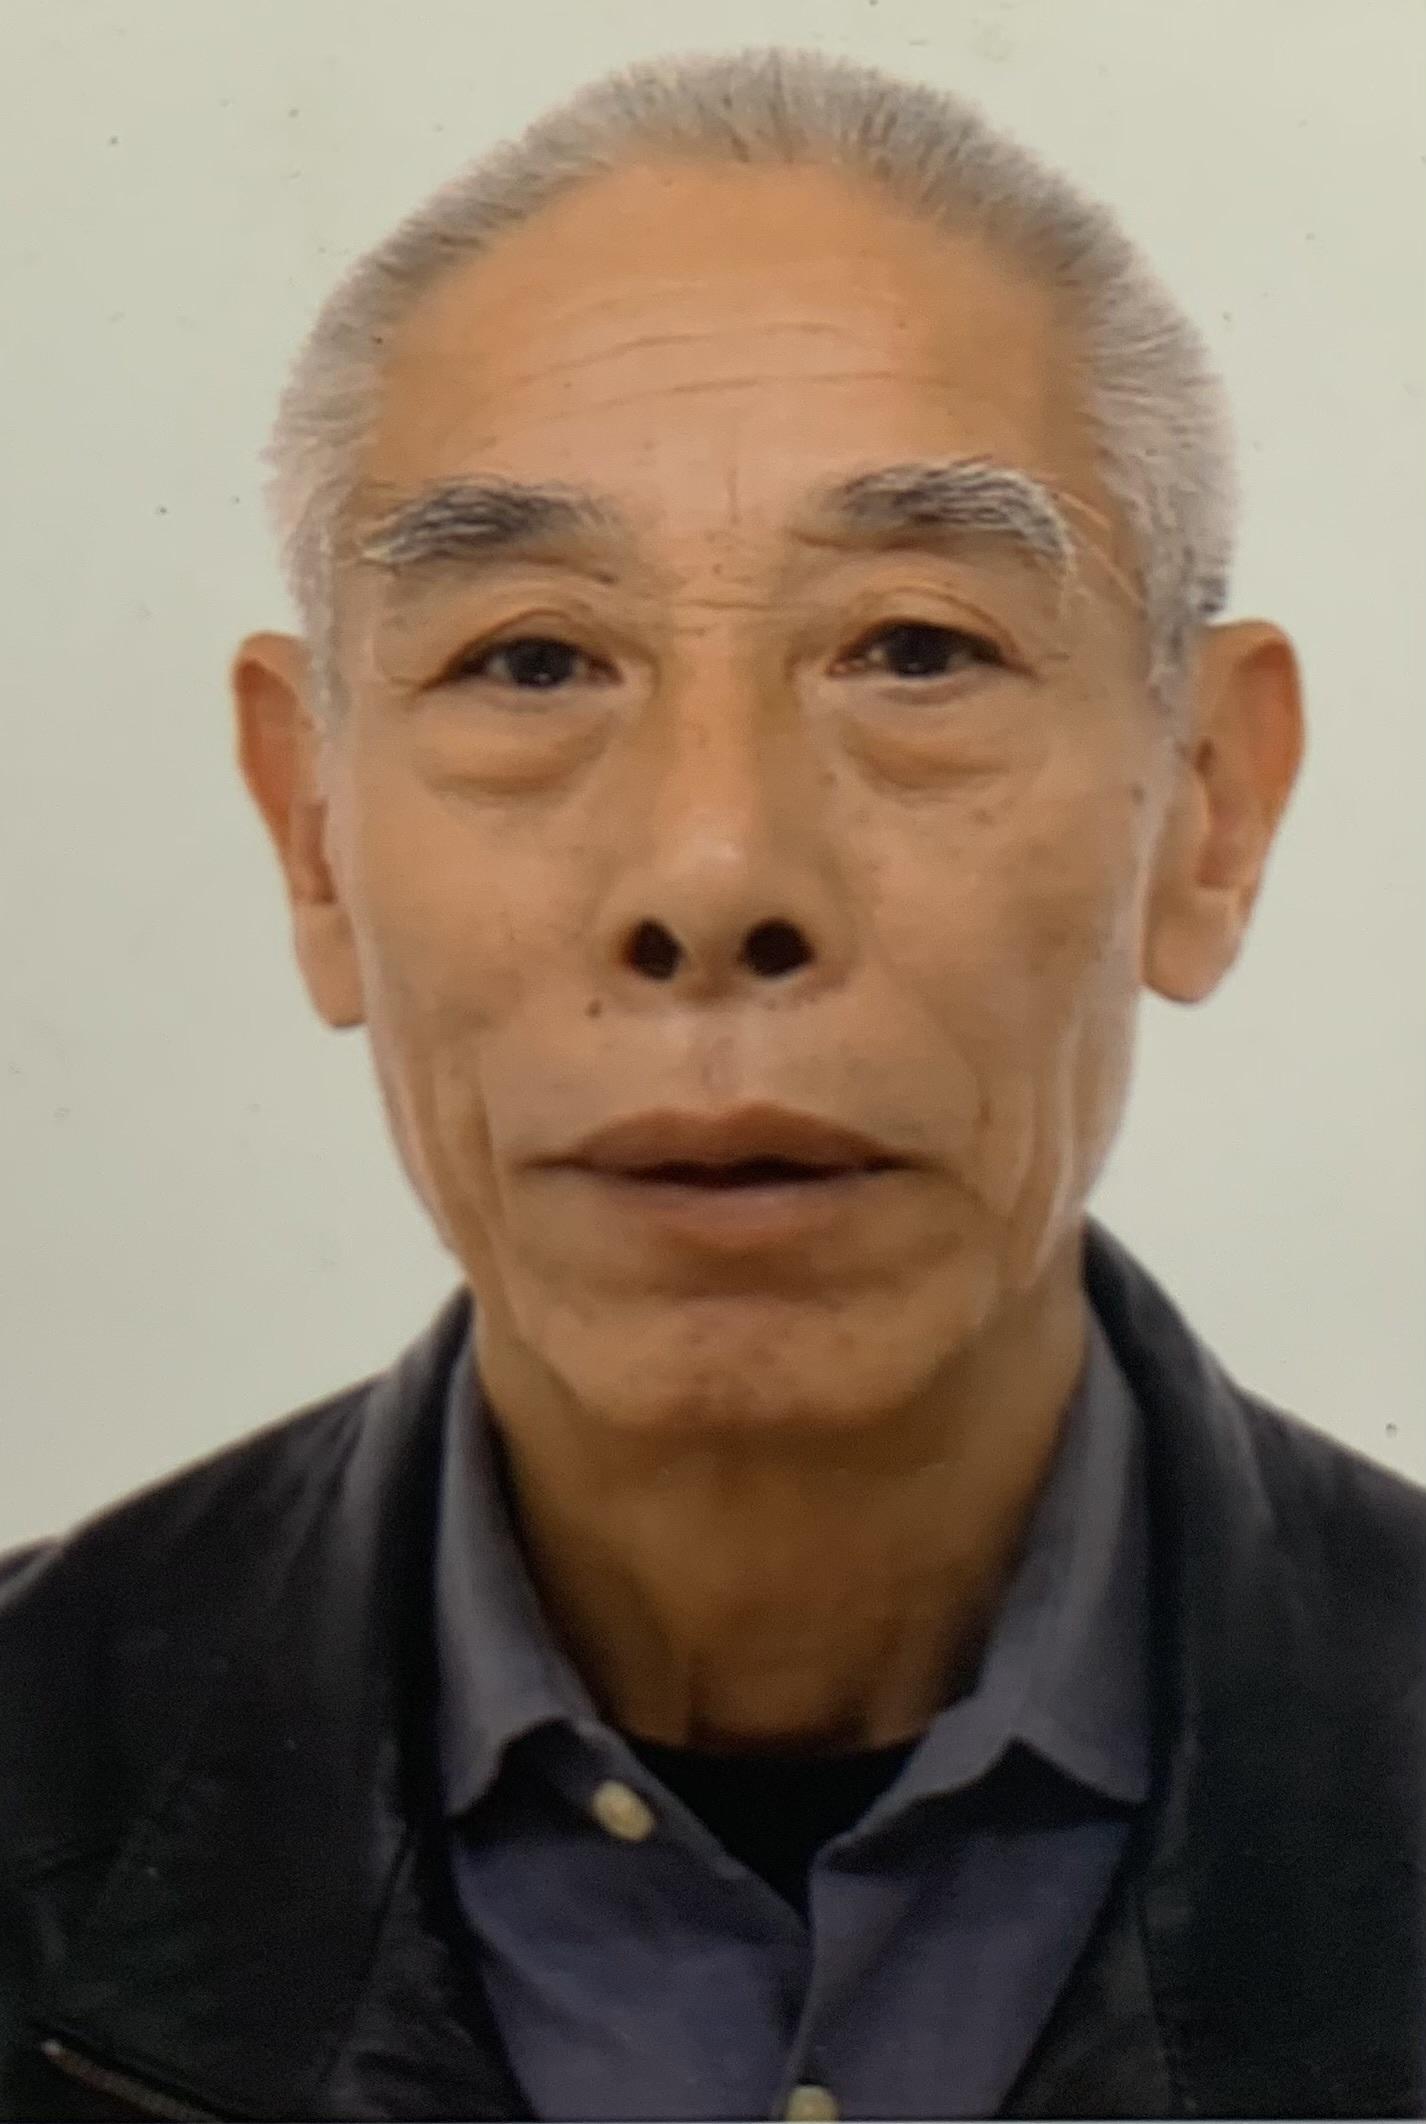 Pun To-shing, aged 75, is about 1.58 metres tall, 43 kilograms in weight and of thin build. He has a pointed face with yellow complexion and short white hair. He was last seen wearing a dark blue long-sleeved down jacket, black trousers, black sports shoes, a black knitted hat and brown gloves.